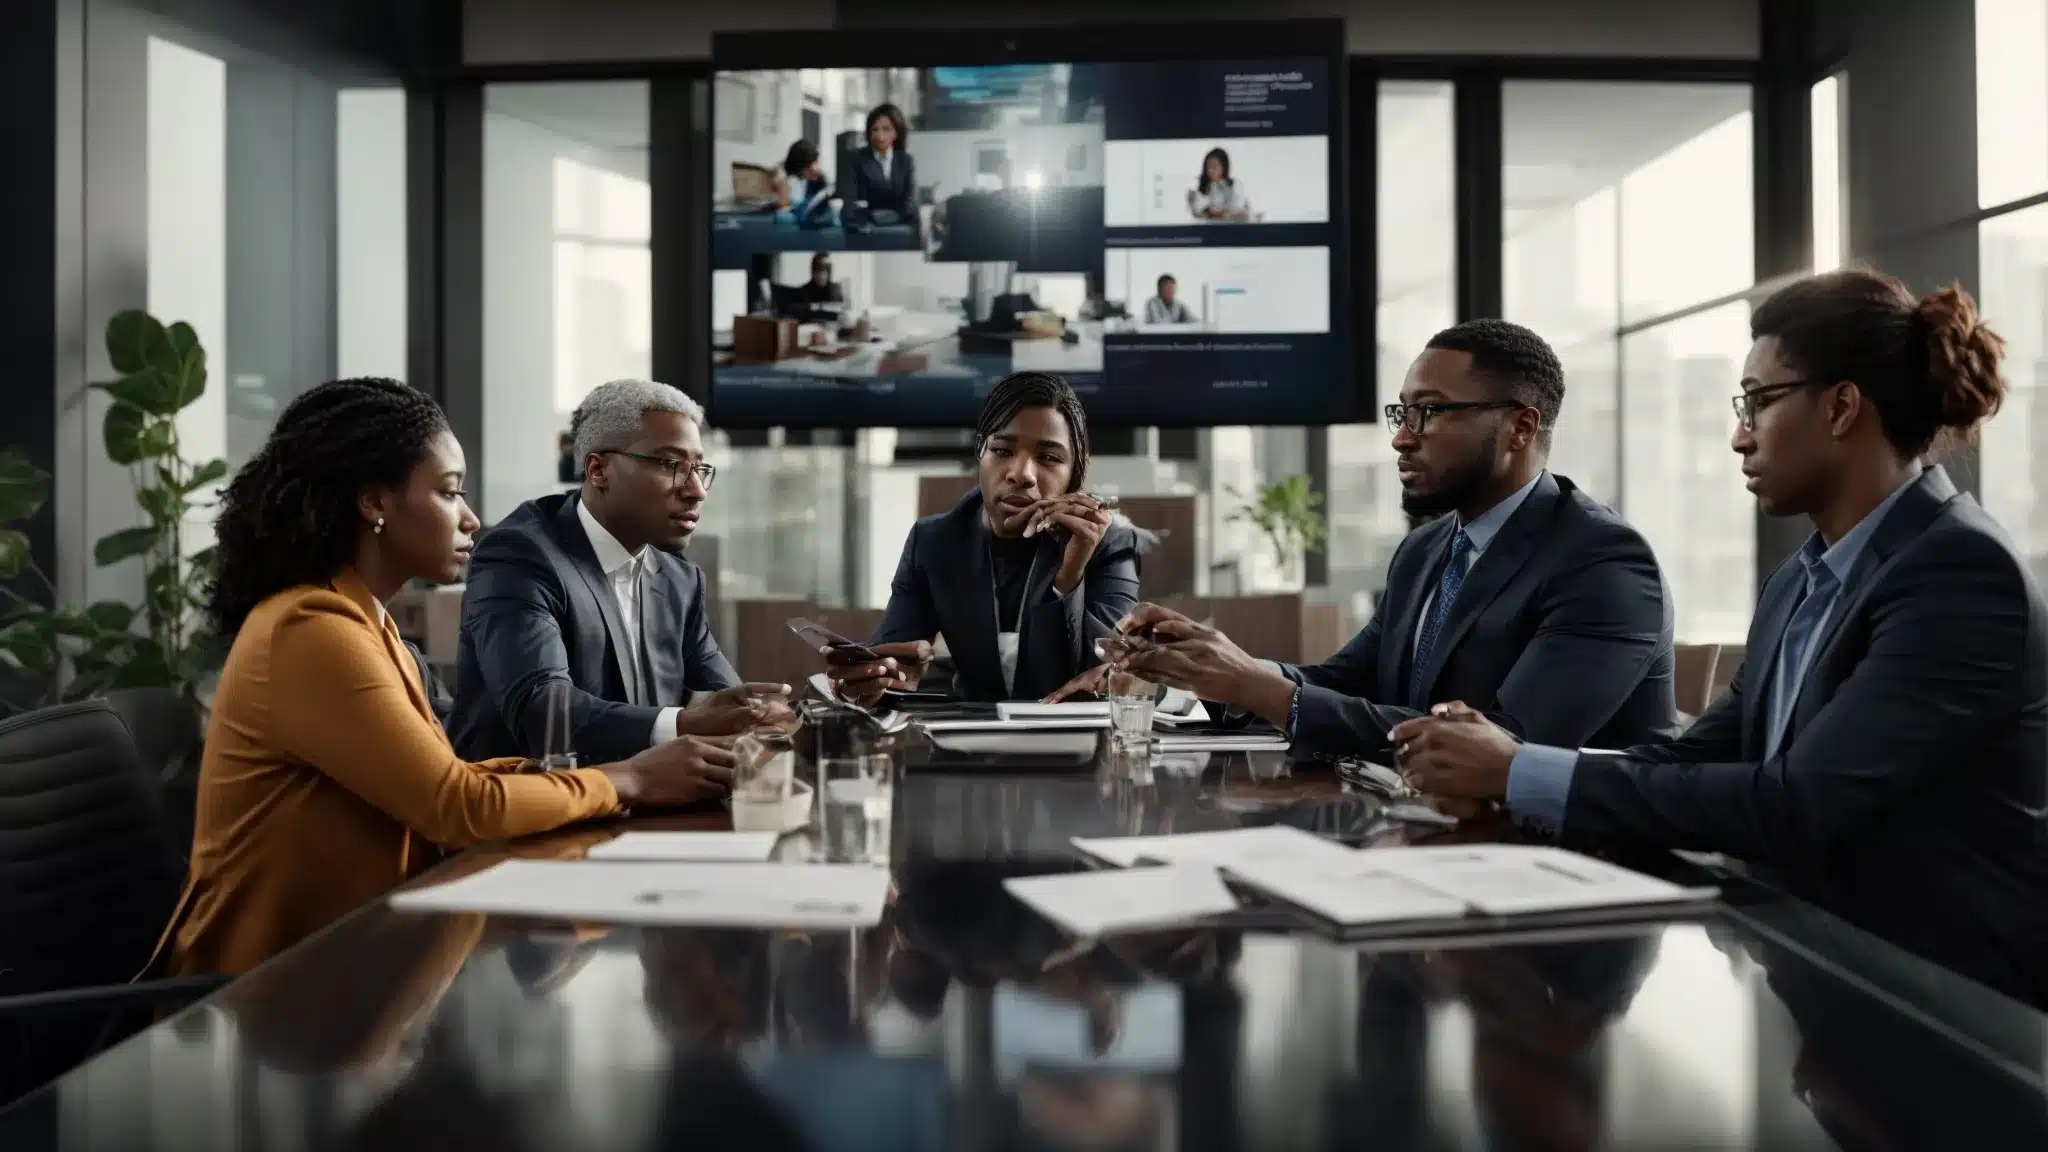 A Diverse Group Of Marketing Professionals Discusses Strategies Around A Conference Table With Multiple Digital Devices And A Large Screen Displaying Advertising Analytics.